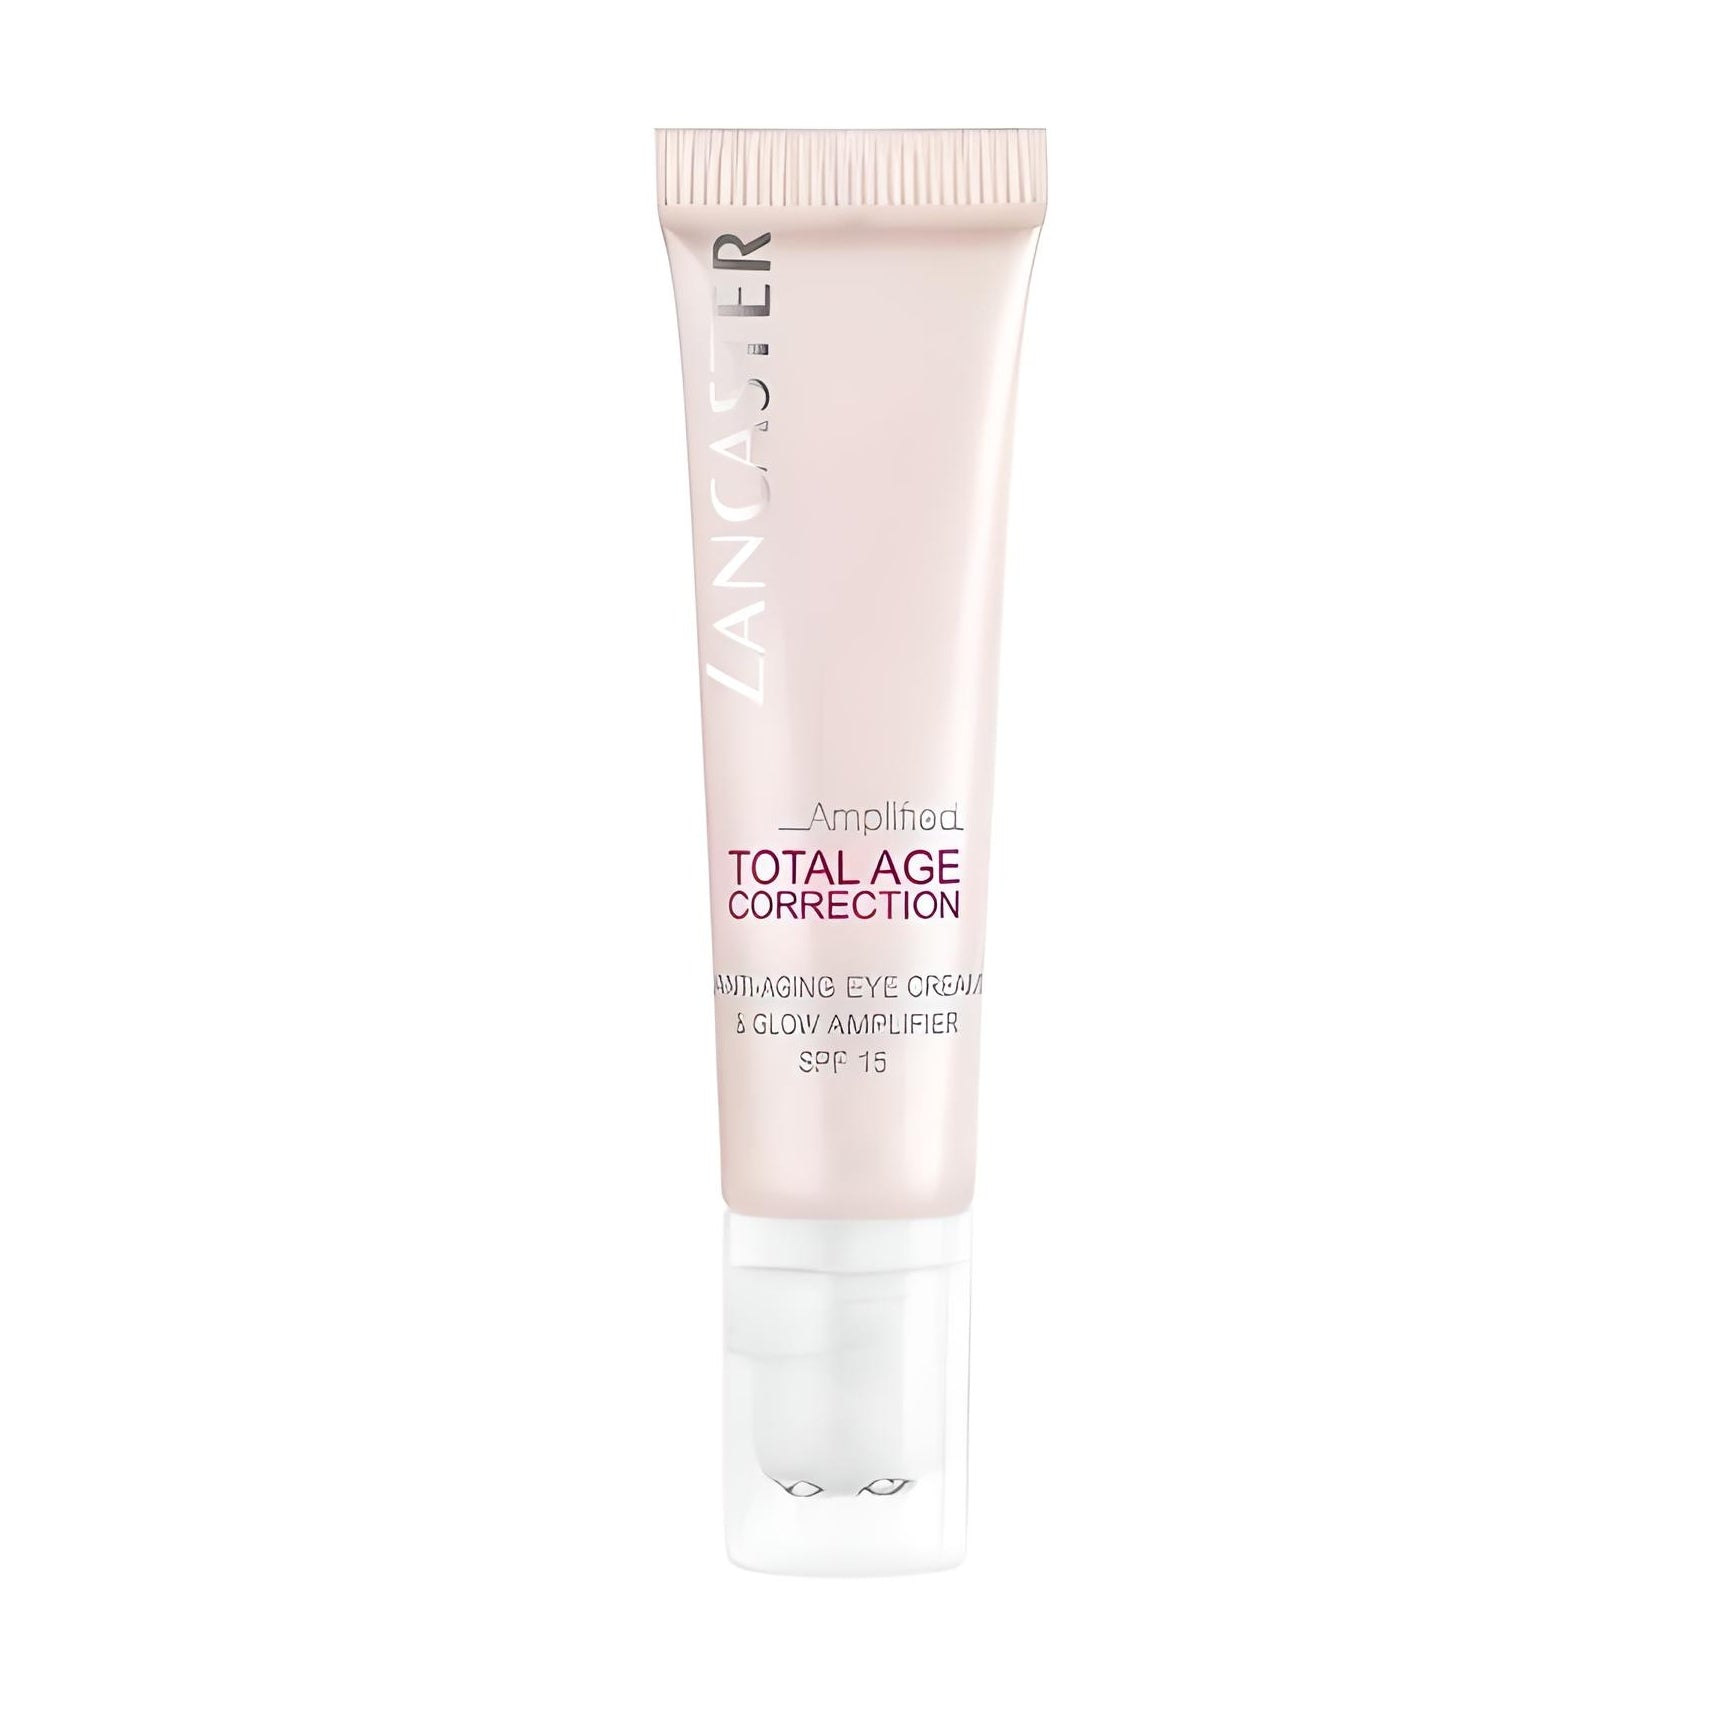 TOTAL AGE CORRECTION SPF15 complete eye cream